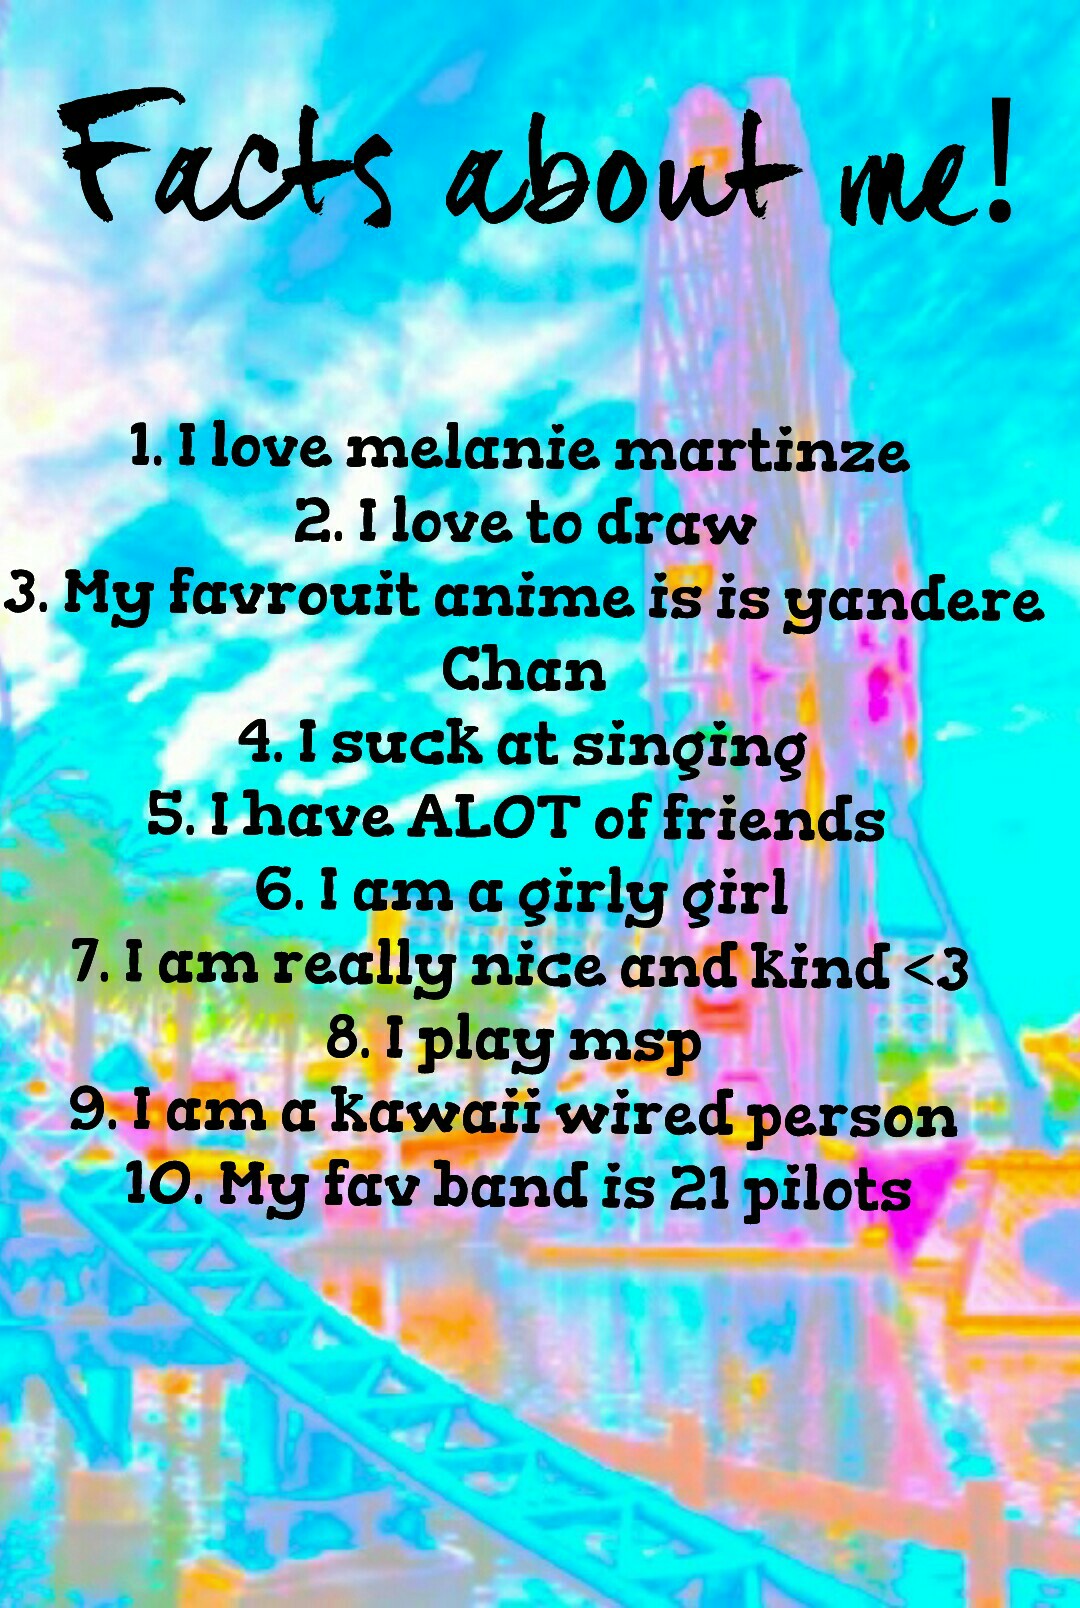 1. I love melanie martinze 
2. I love to draw
3. My favrouit anime is is yandere
Chan
4. I suck at singing
5. I have ALOT of friends 
6. I am a girly girl
7. I am really nice and kind <3
8. I play msp 
9. I am a kawaii wired person 
10. My fav band is 21 